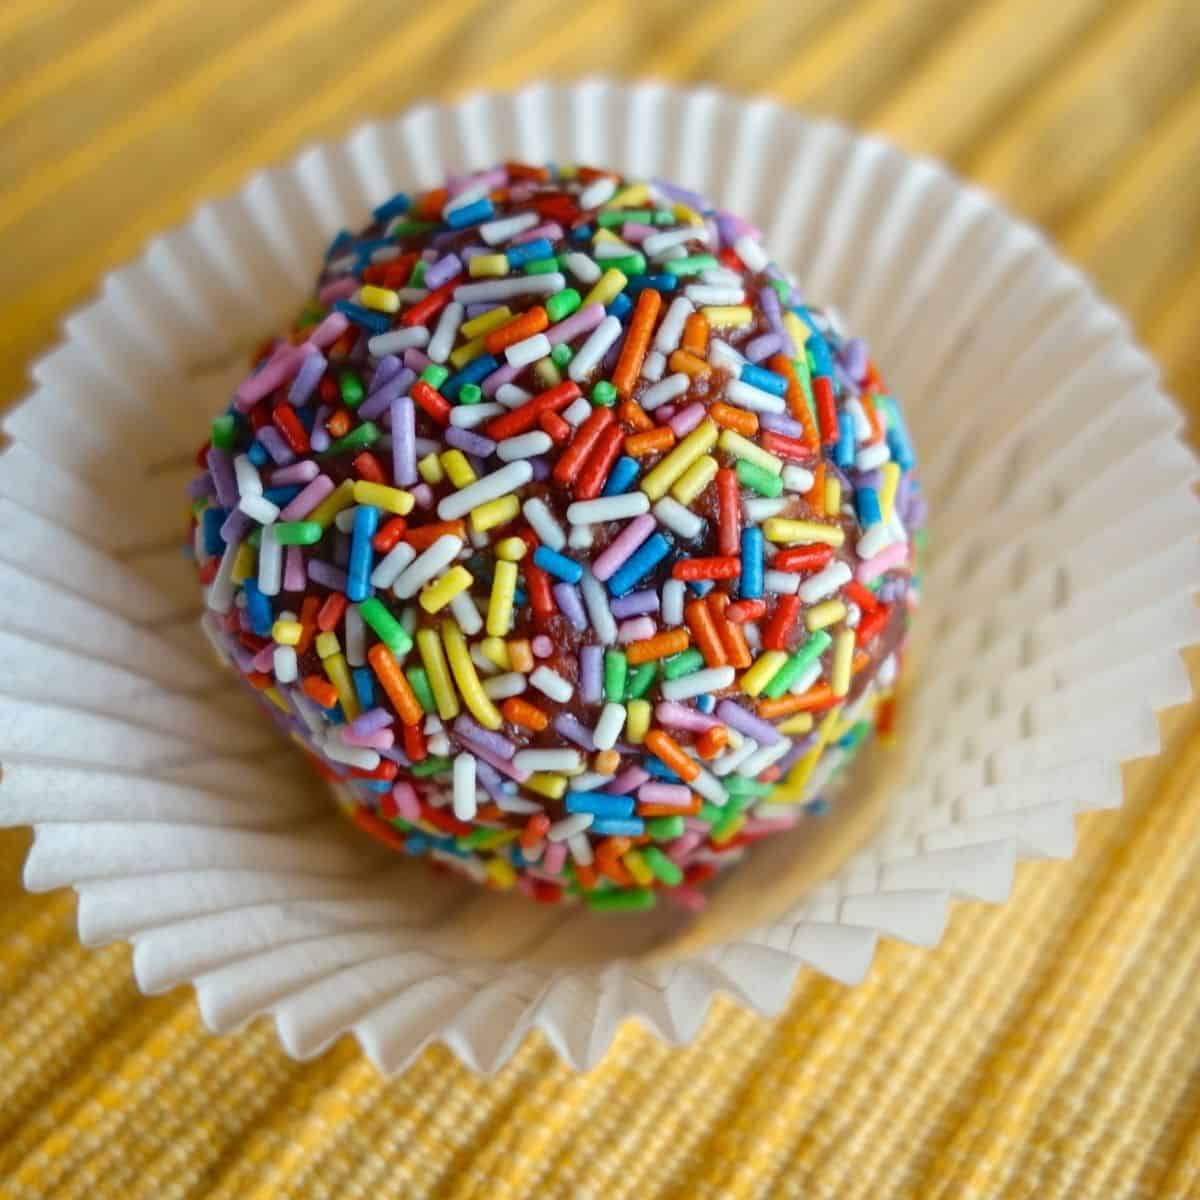 Rainbow Sprinkle Protein Ball in a white paper cupcake holder on a yellow place mat